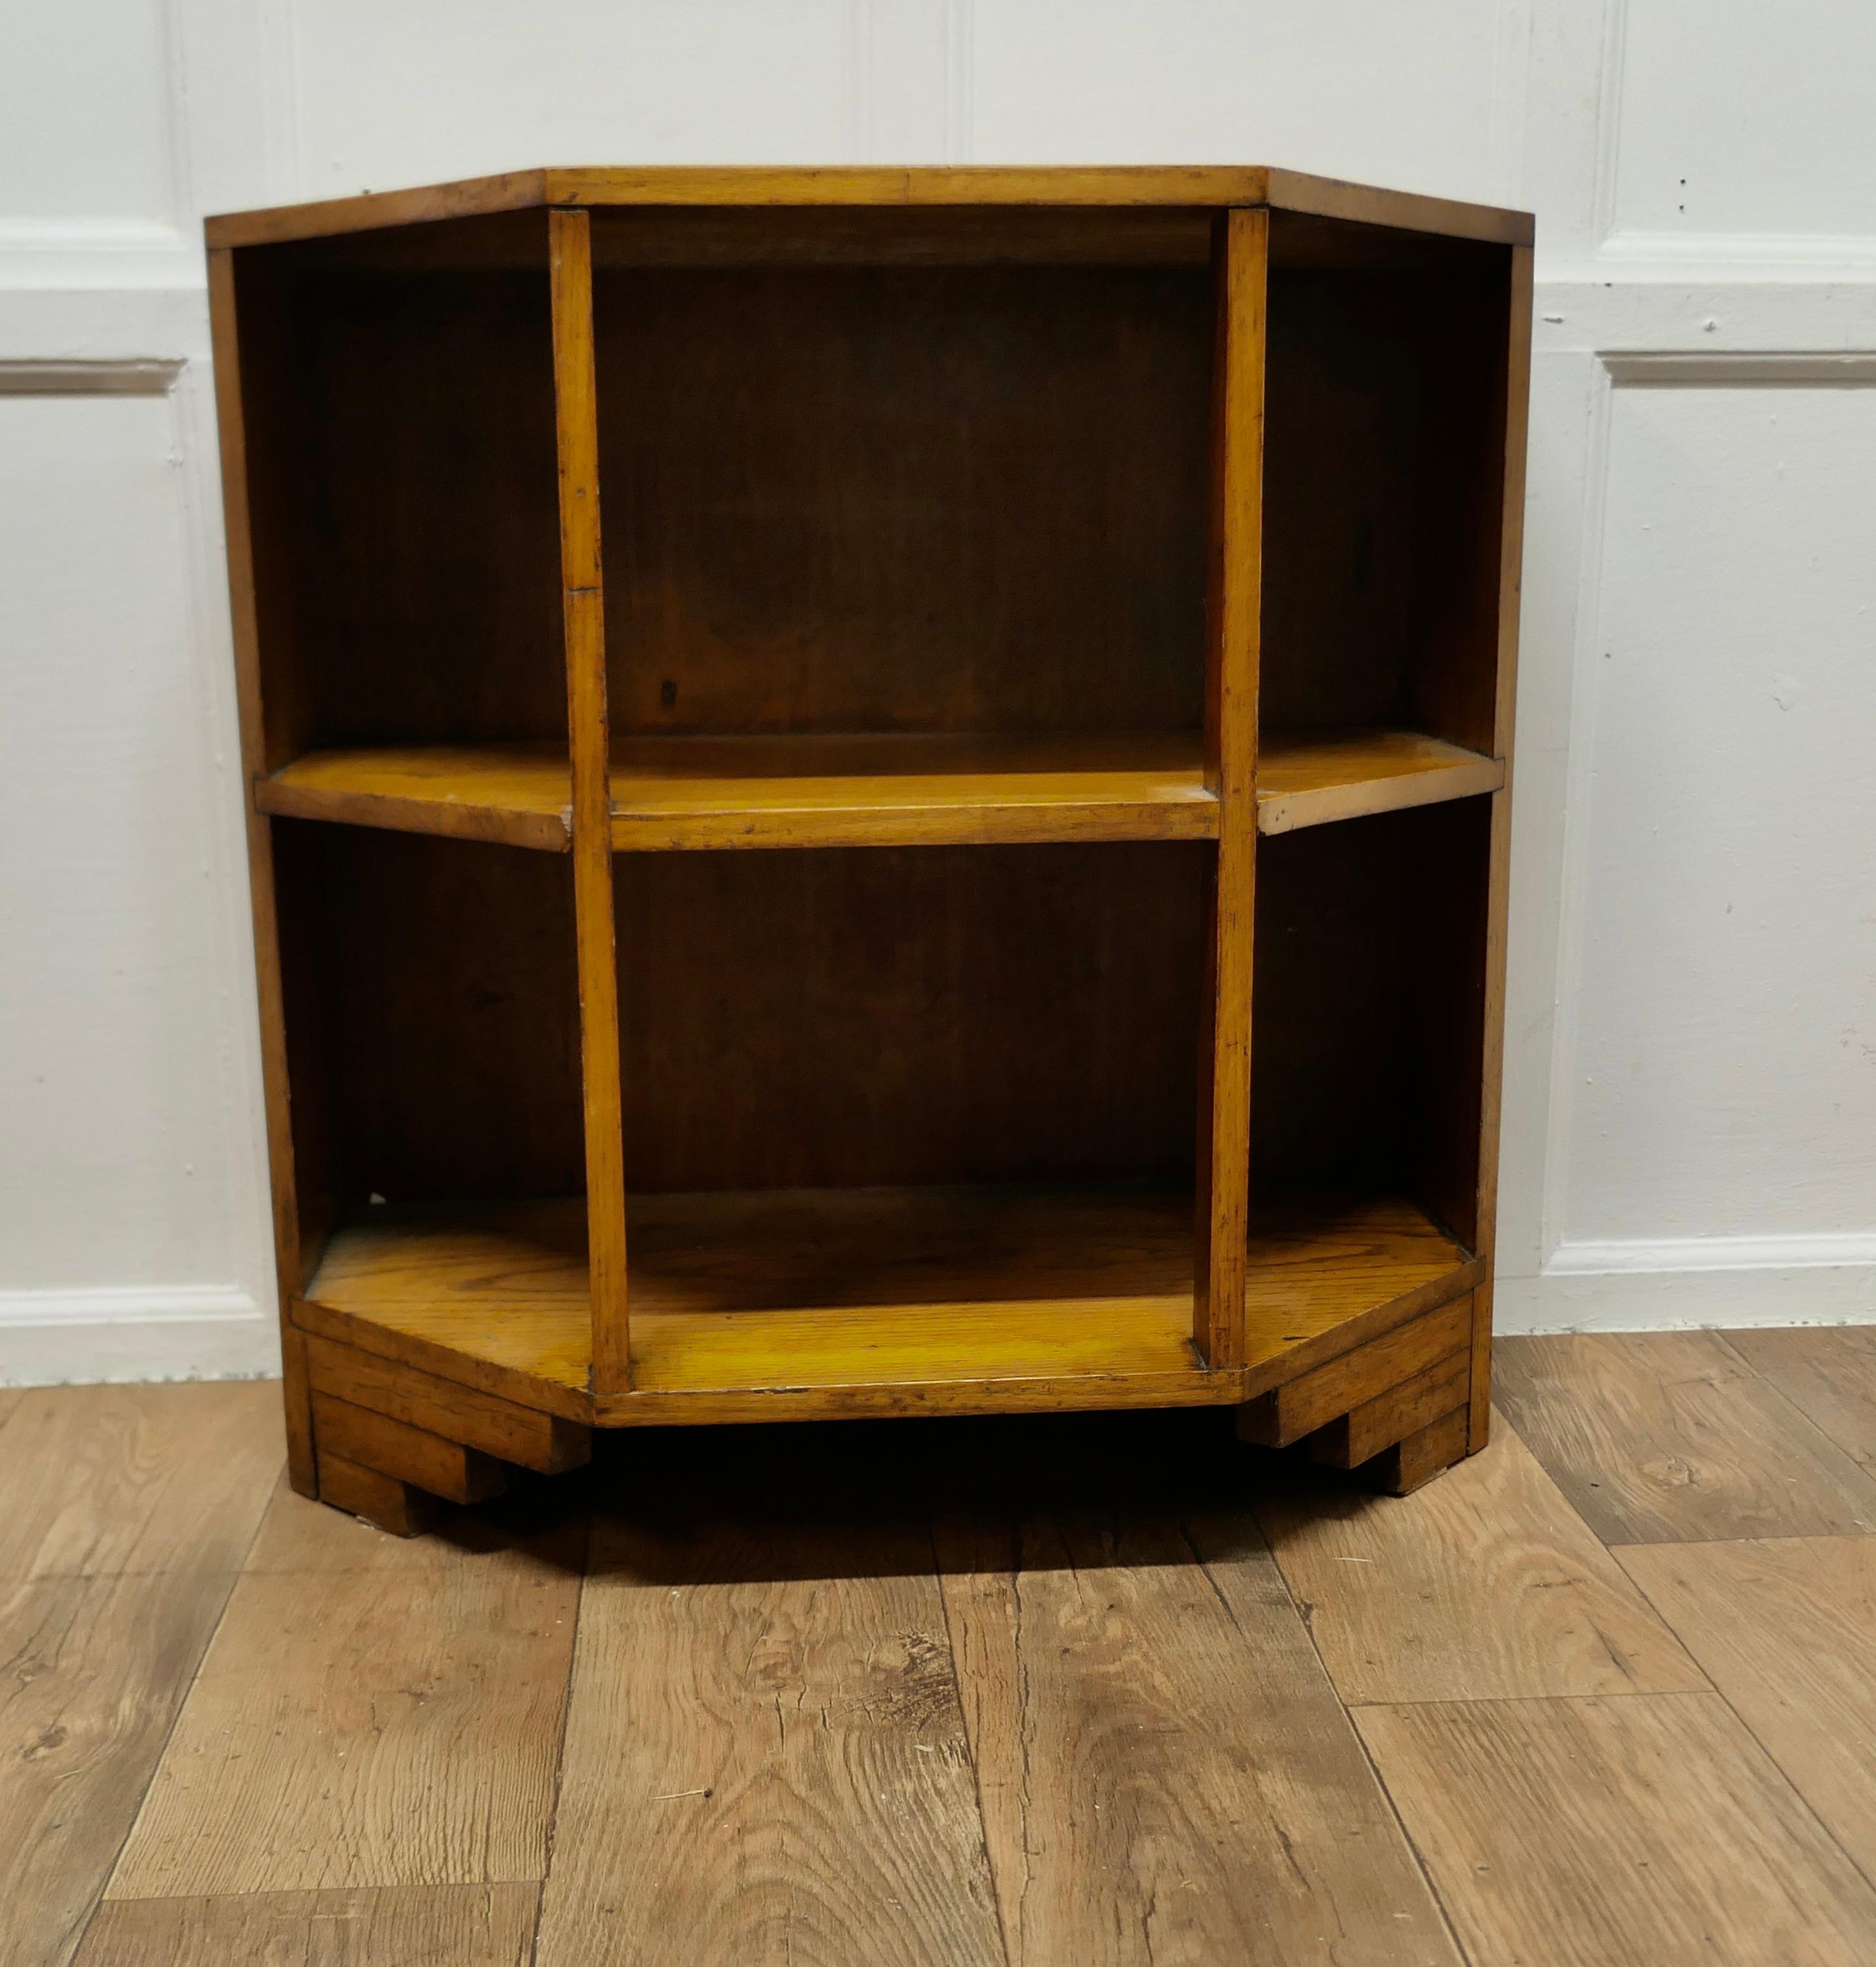 Art Deco Odeon Style Golden Oak Floor Standing Shelves

This is an excellent Heavy quality piece made in Golden Oak in the Art Deco style, note odeon style bracket feet 
The unit has a 3 sided shape to the front and a long shelf in the centre, a